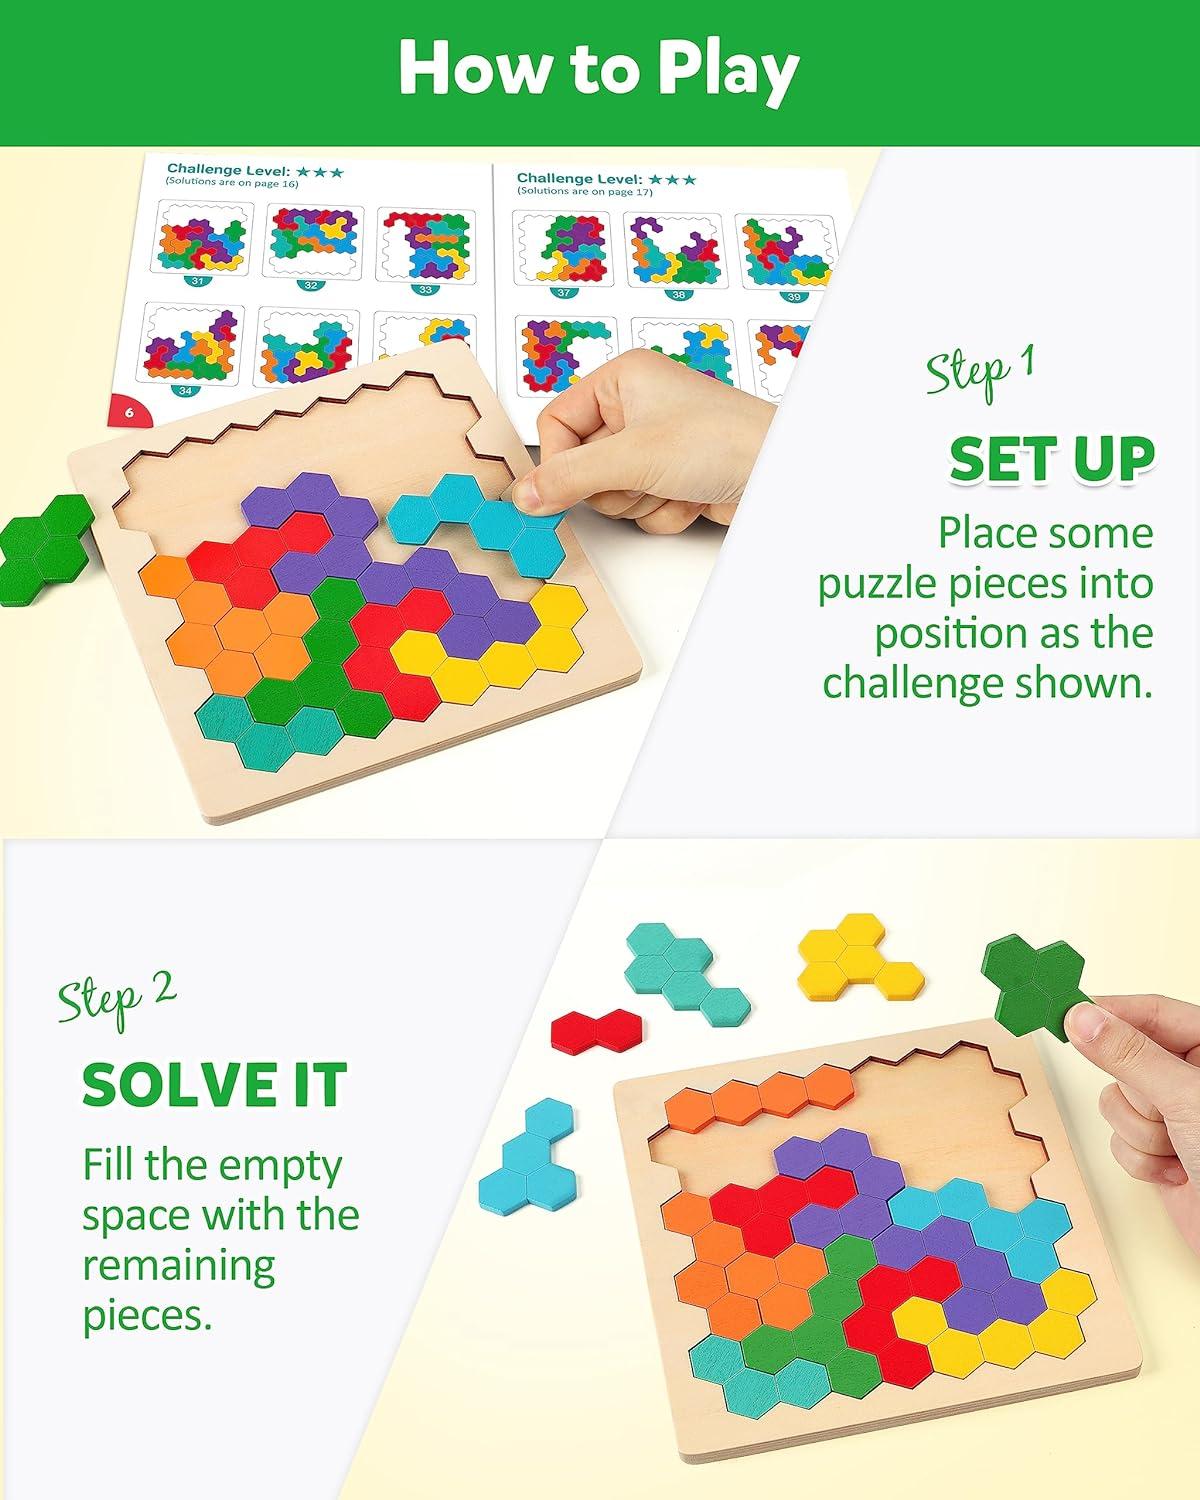 Stimulate Young Minds with Tangram Puzzles - An Ancient Geometric Puzzle Revived